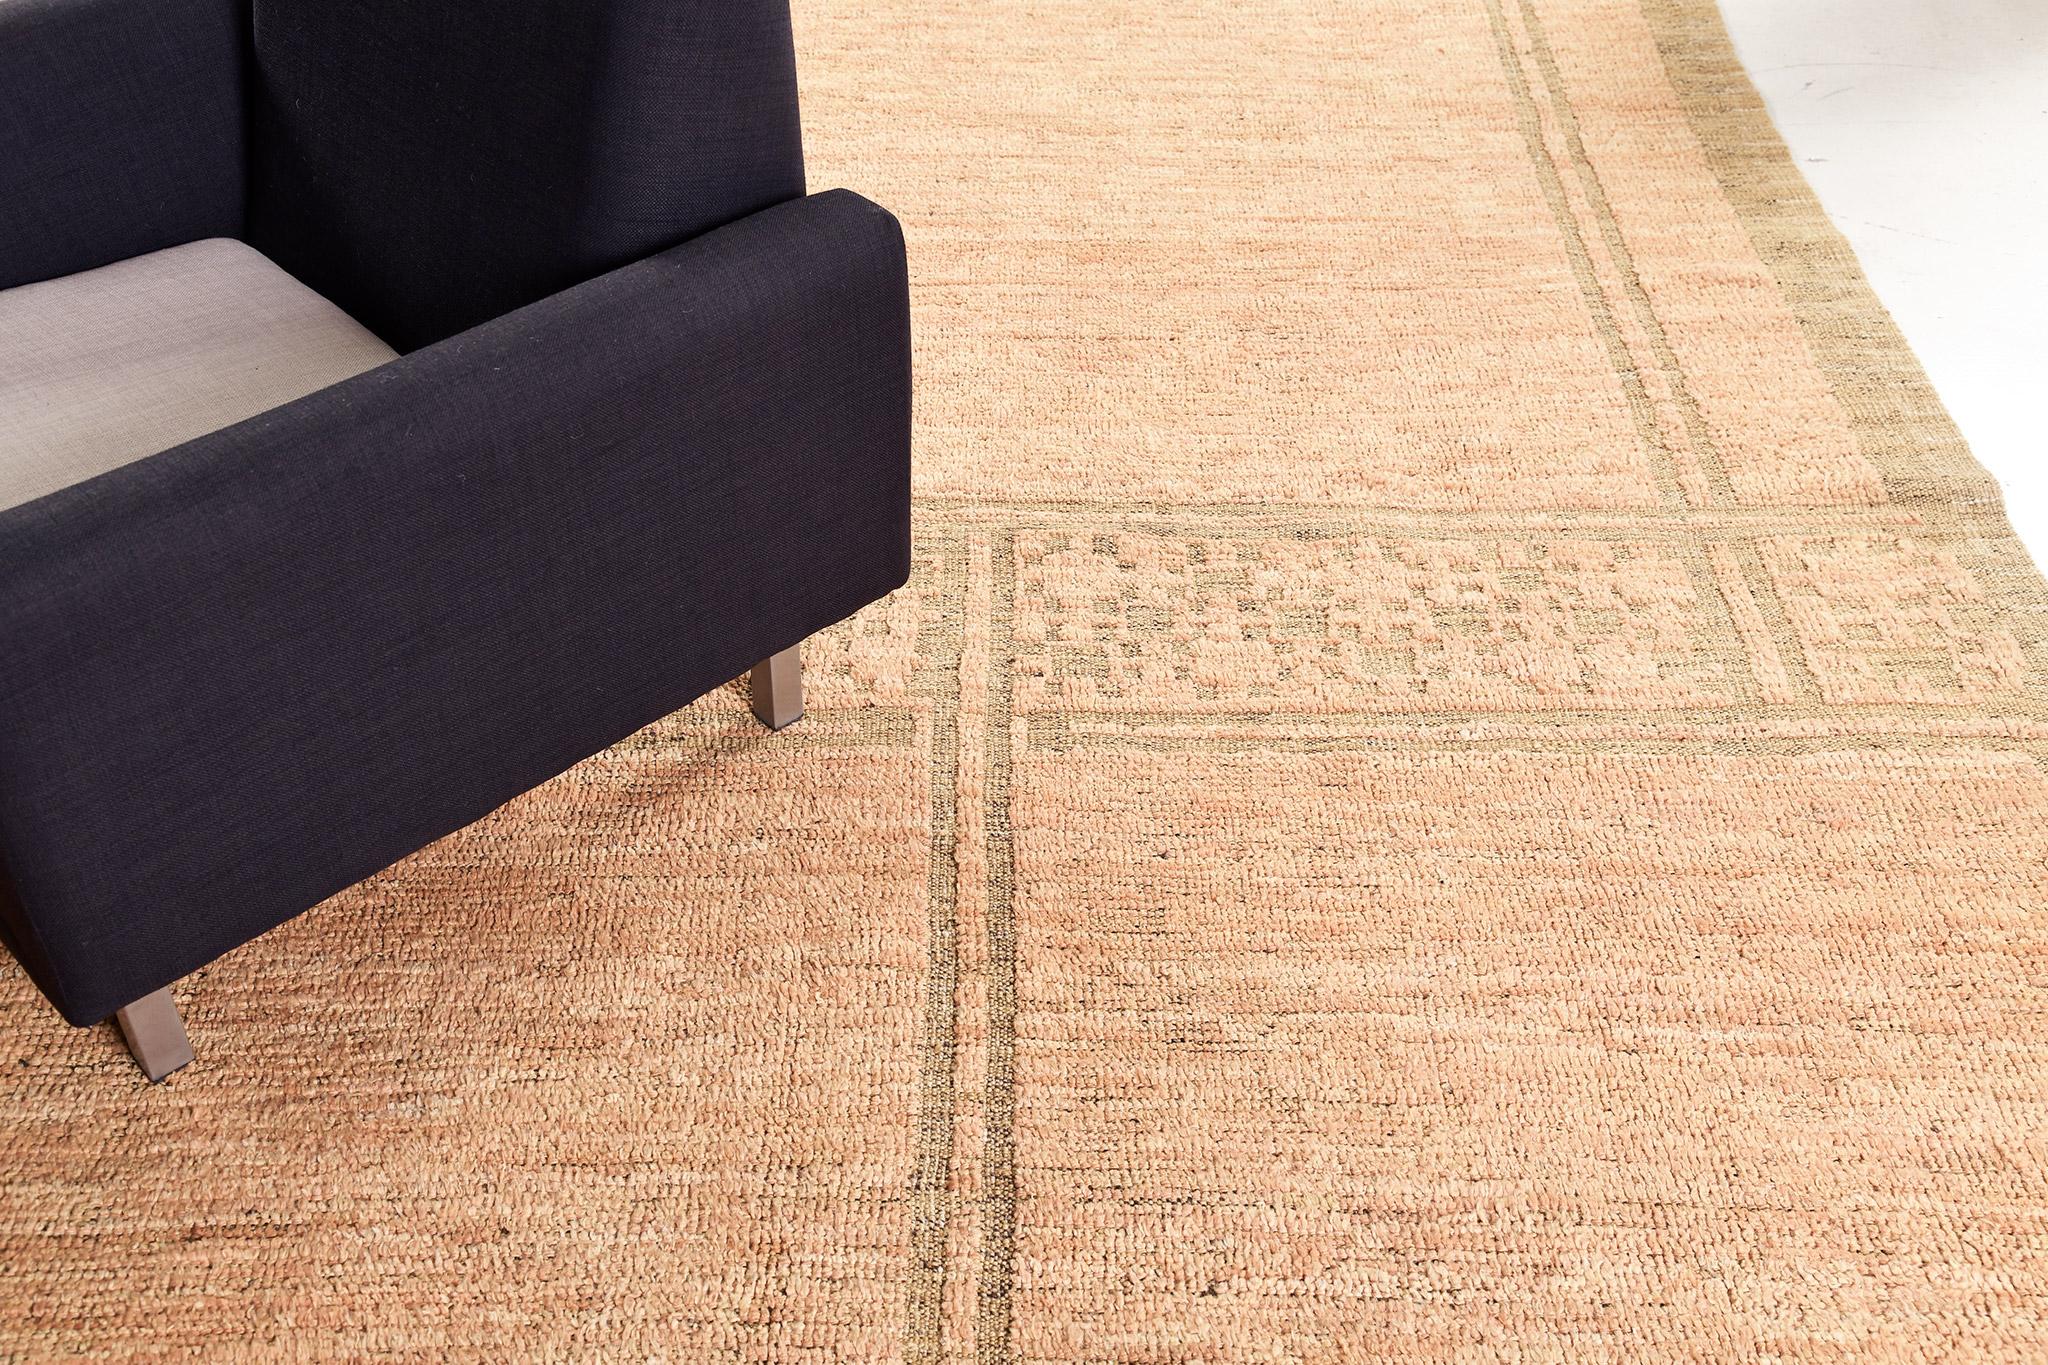 Udad’ in Nomad Collection features an all over textured coral field. This breathtaking rug features barely there lines and accents which makes this piece interesting to the viewer’s point of view. Elegant yet remarkable, this rug is perfect to wide